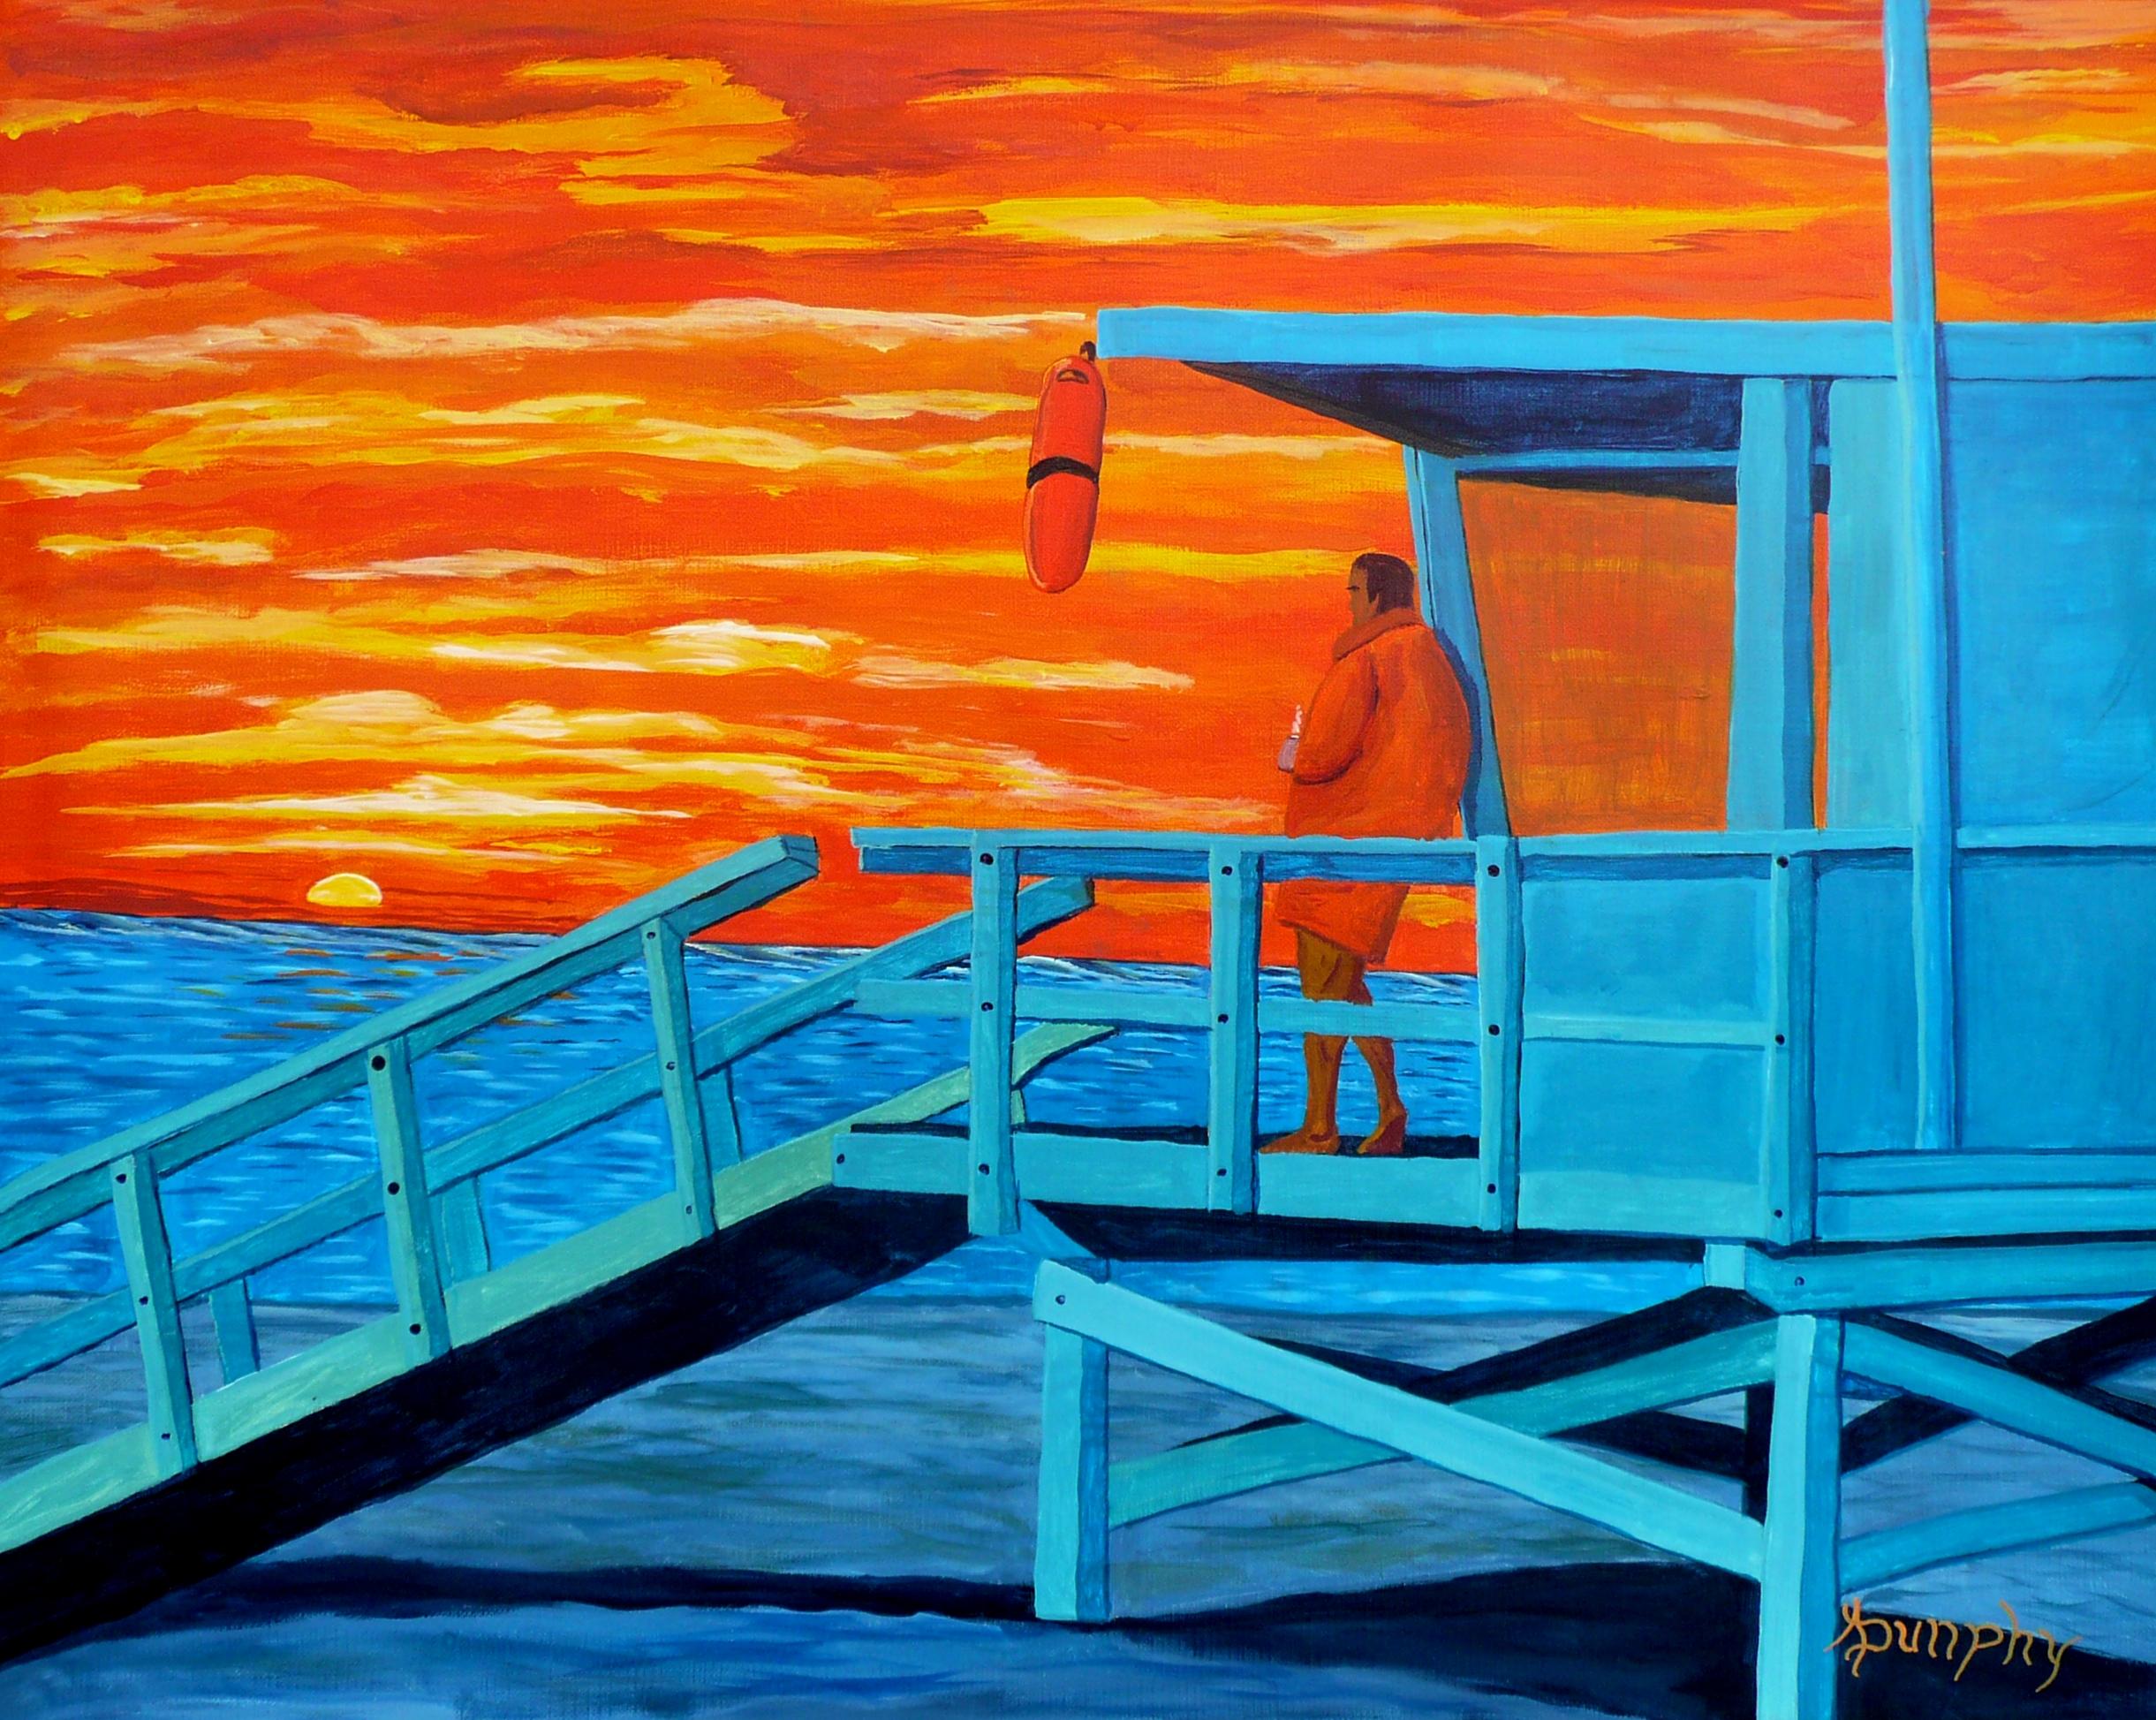 The last day of summer has come! This lifeguard is enjoying the golden sunset as he prepares his tower for the final shutdown.     This painting has been created using professional grade acrylics on archival quality canvas paper. The overall size of